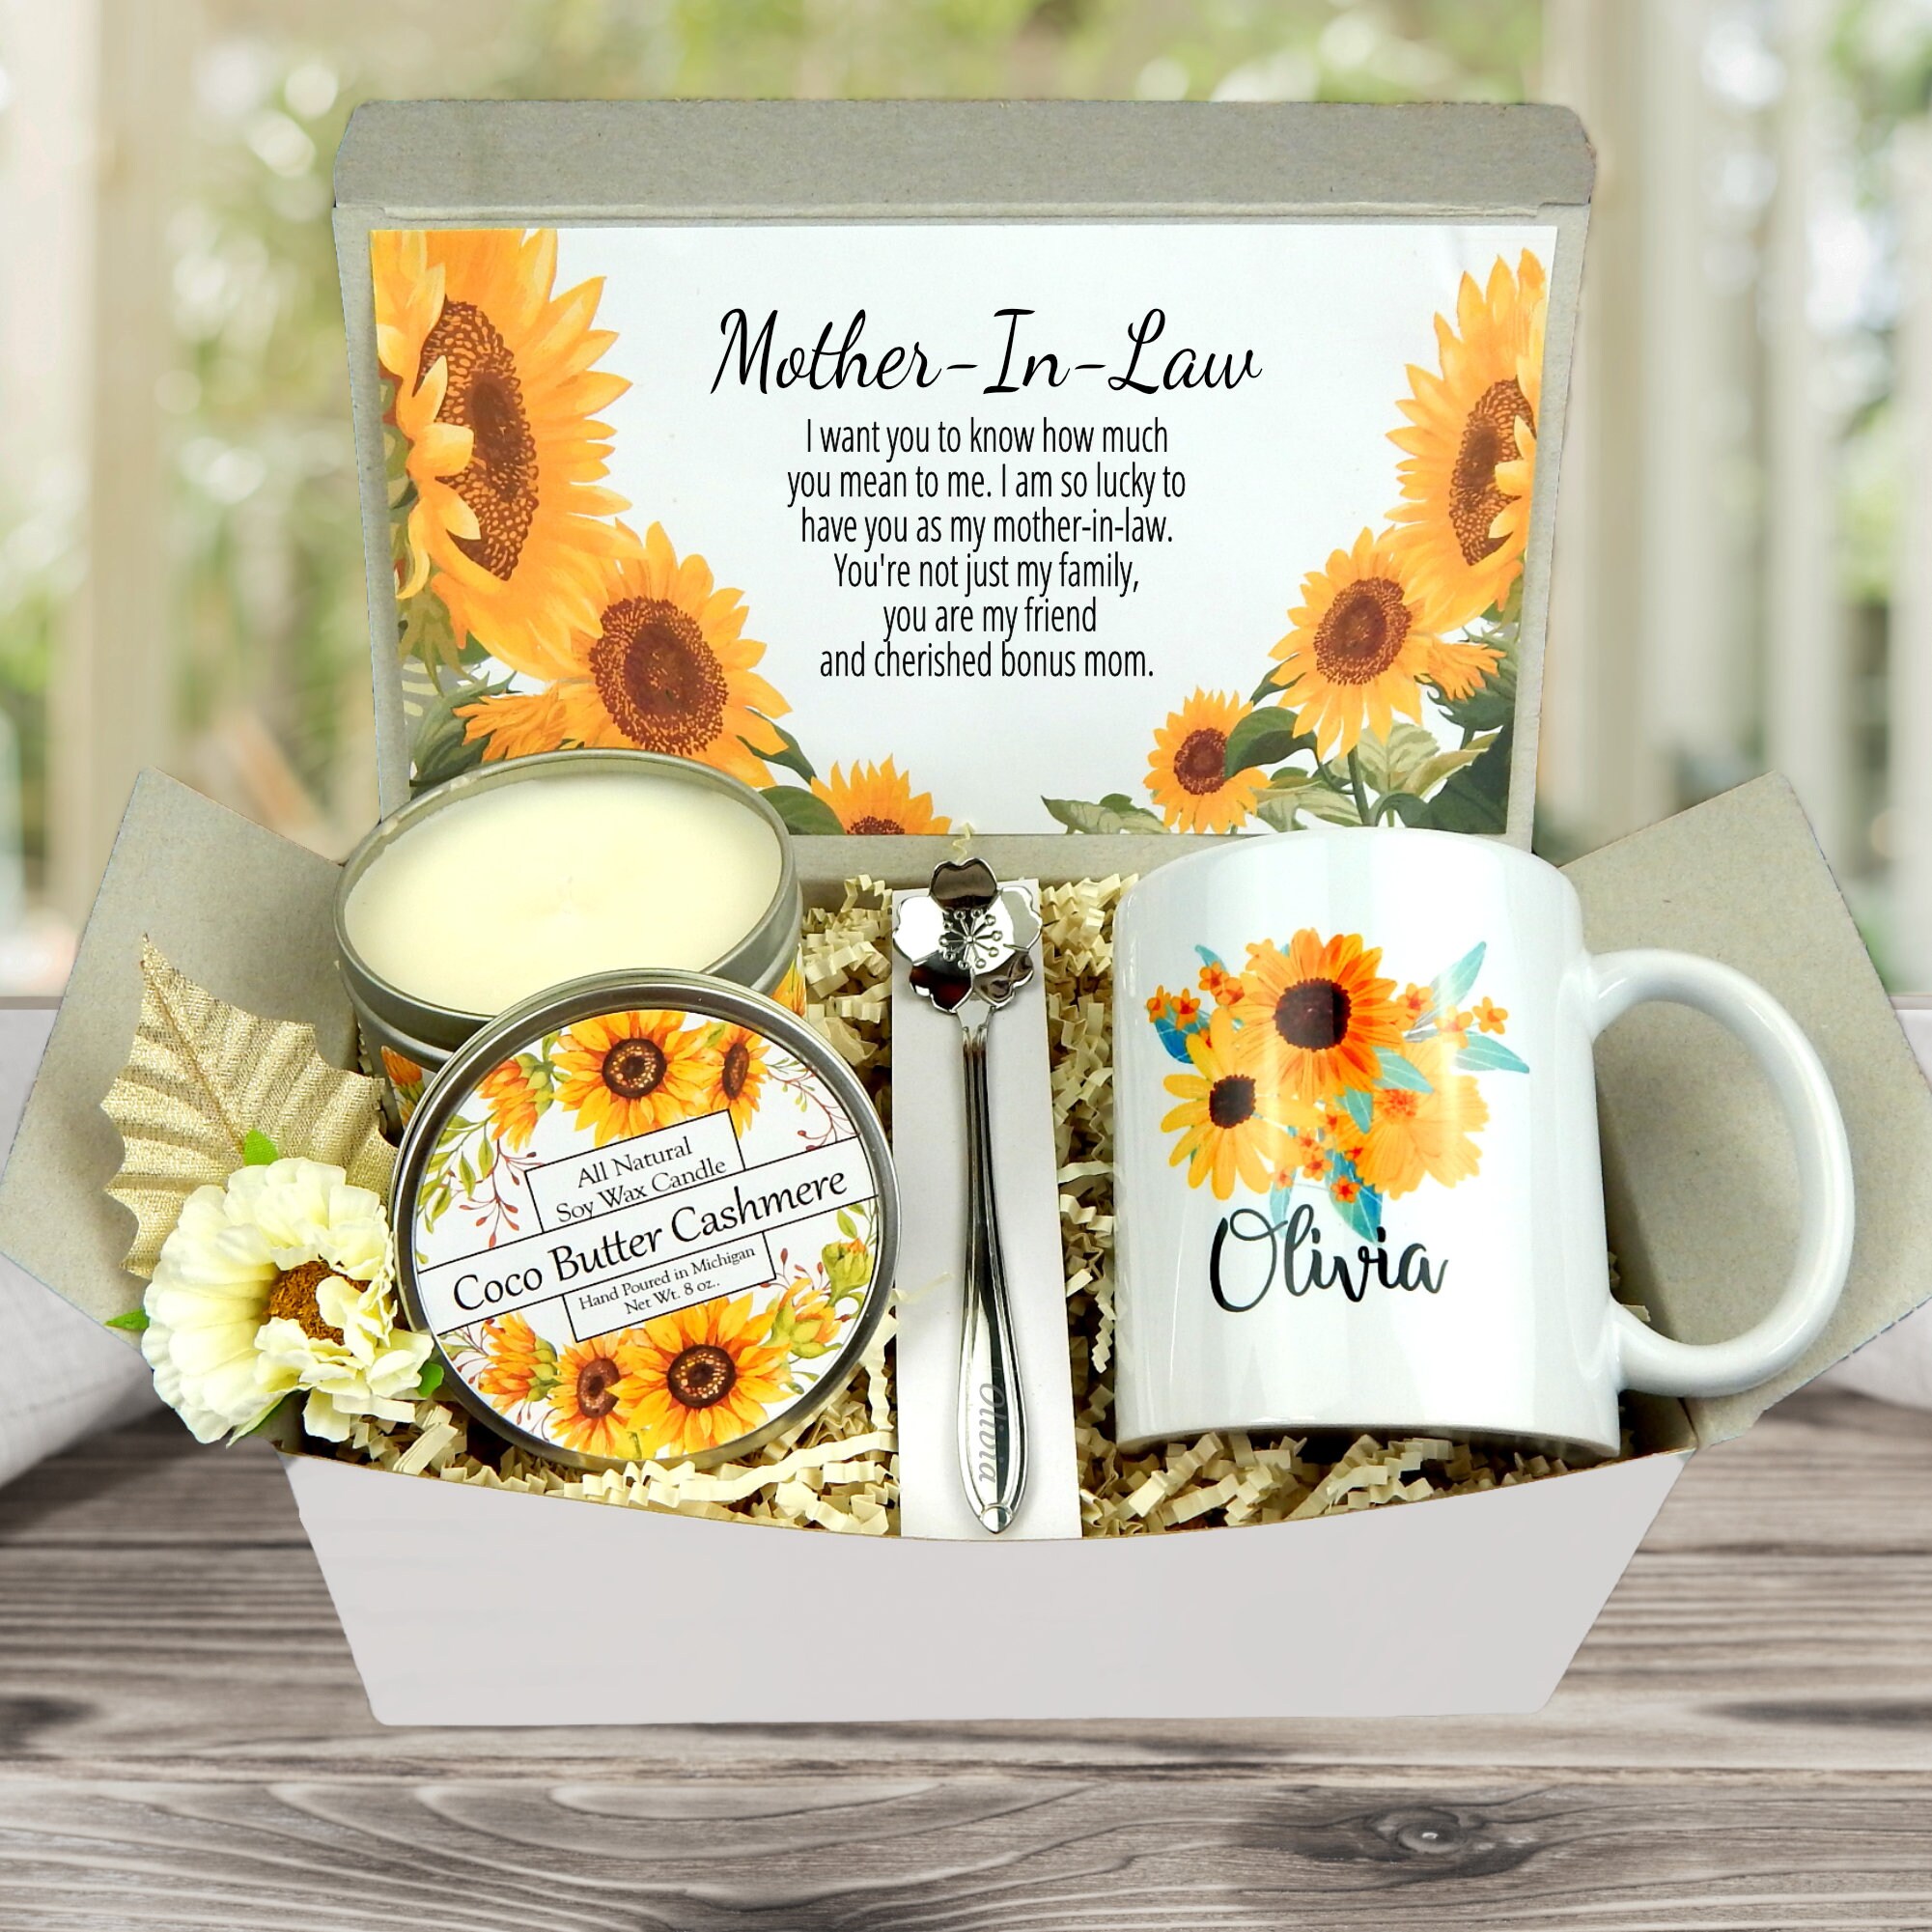  GIFTAGIRL Mother in Law, Mothers Day or Birthday Gifts -  Lovely Mother in Law Gifts with a Beautiful Message and Meaning, A Very  Unique Gift Idea for Any Occasion, and